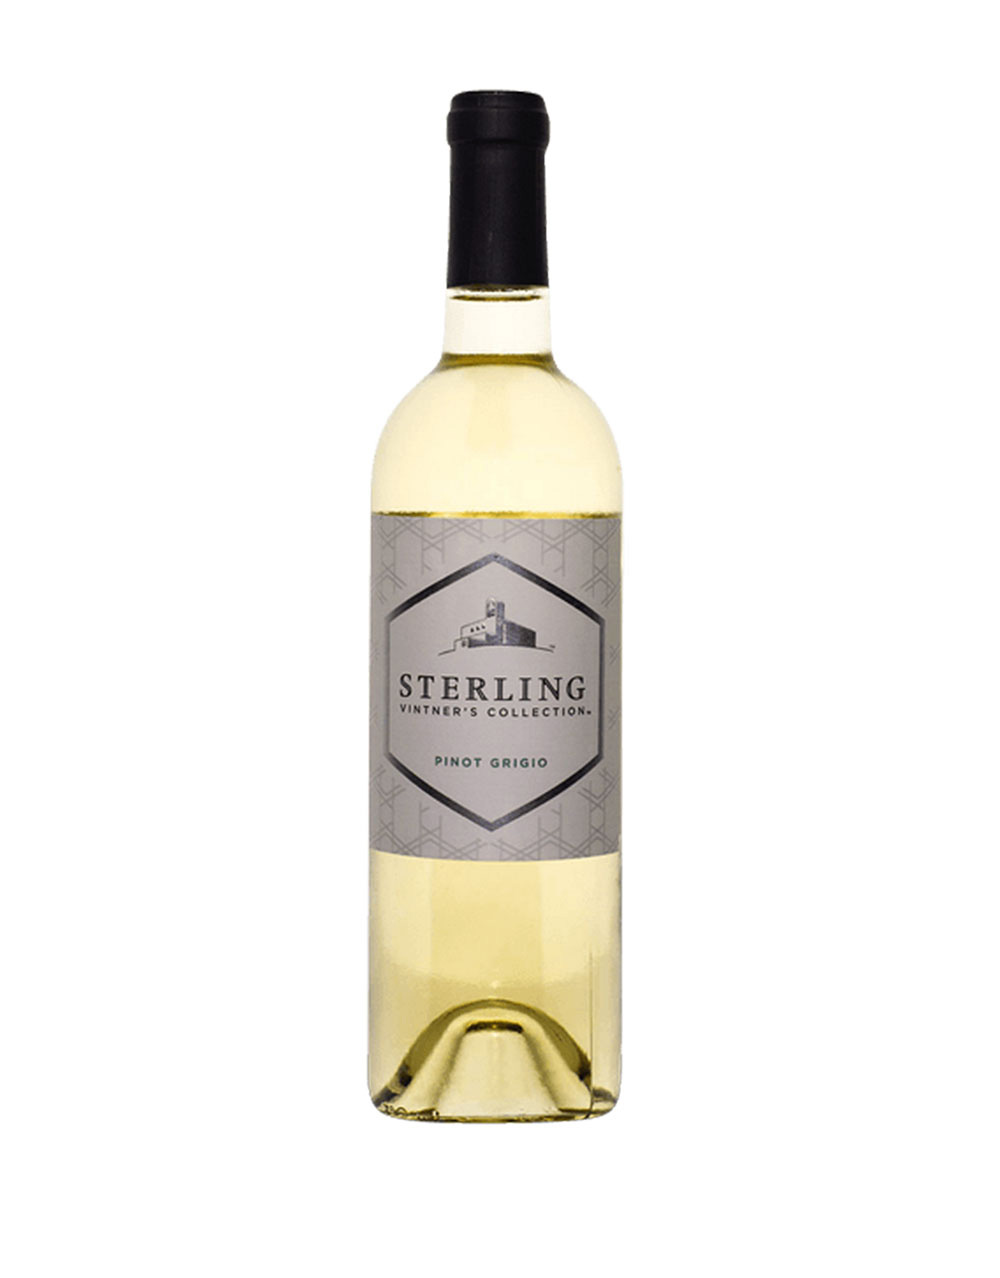 Sterling Vineyards Vintner's Collection Pinot Grigio 2016 Central Coast